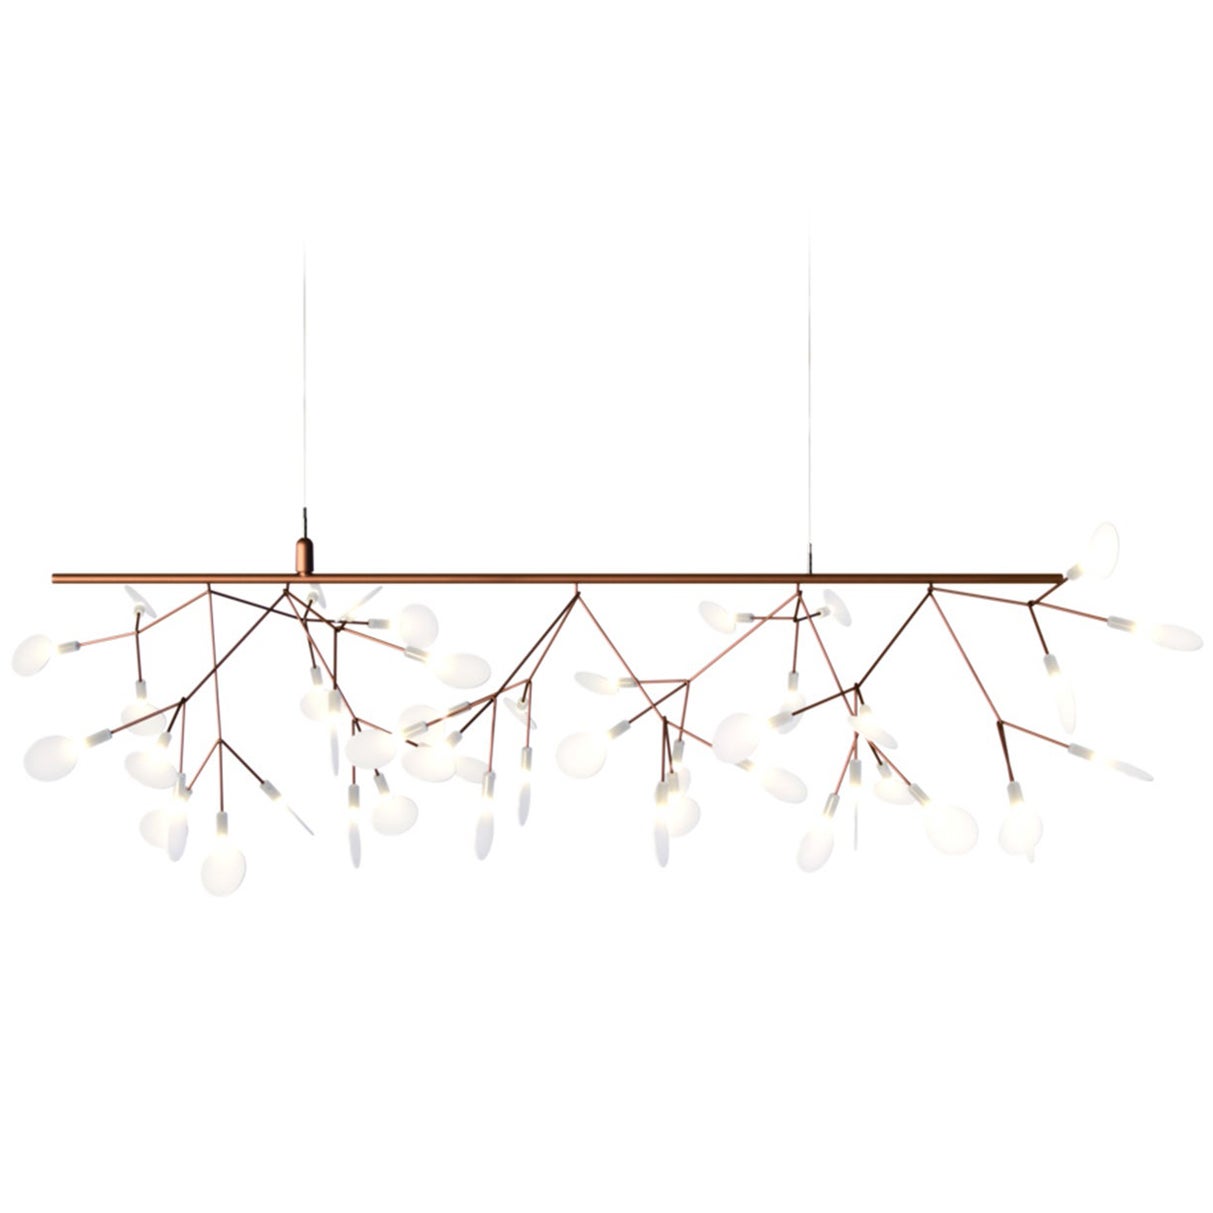 Moooi Heracleum Endless Suspension Lamp in Copper with Polycarbonate Lenses, 10m For Sale